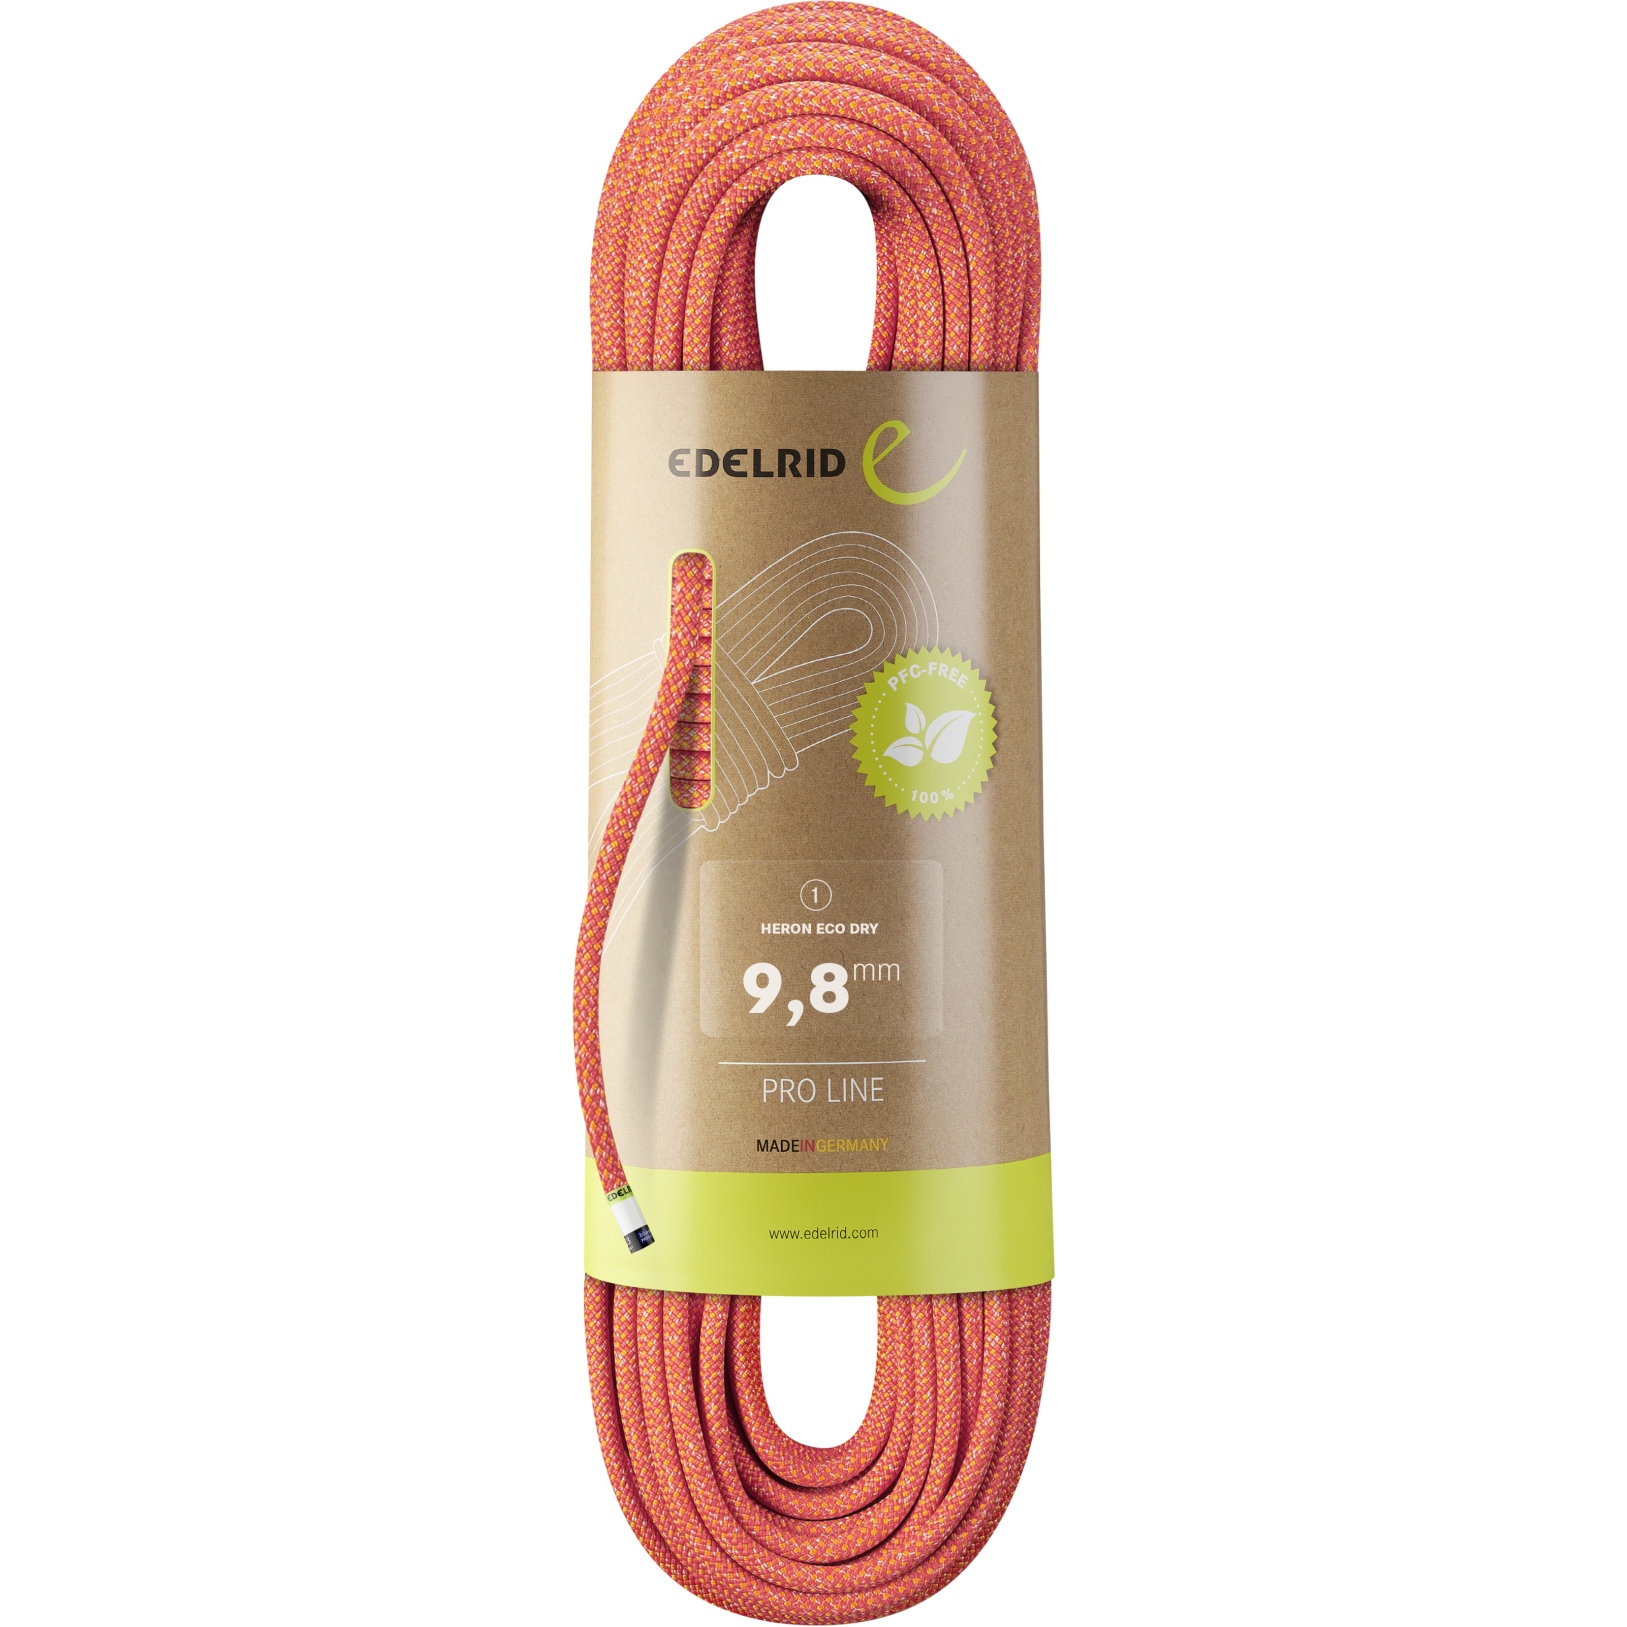 Picture of Edelrid Heron Eco Dry 9,8mm Rope - 70m - fire